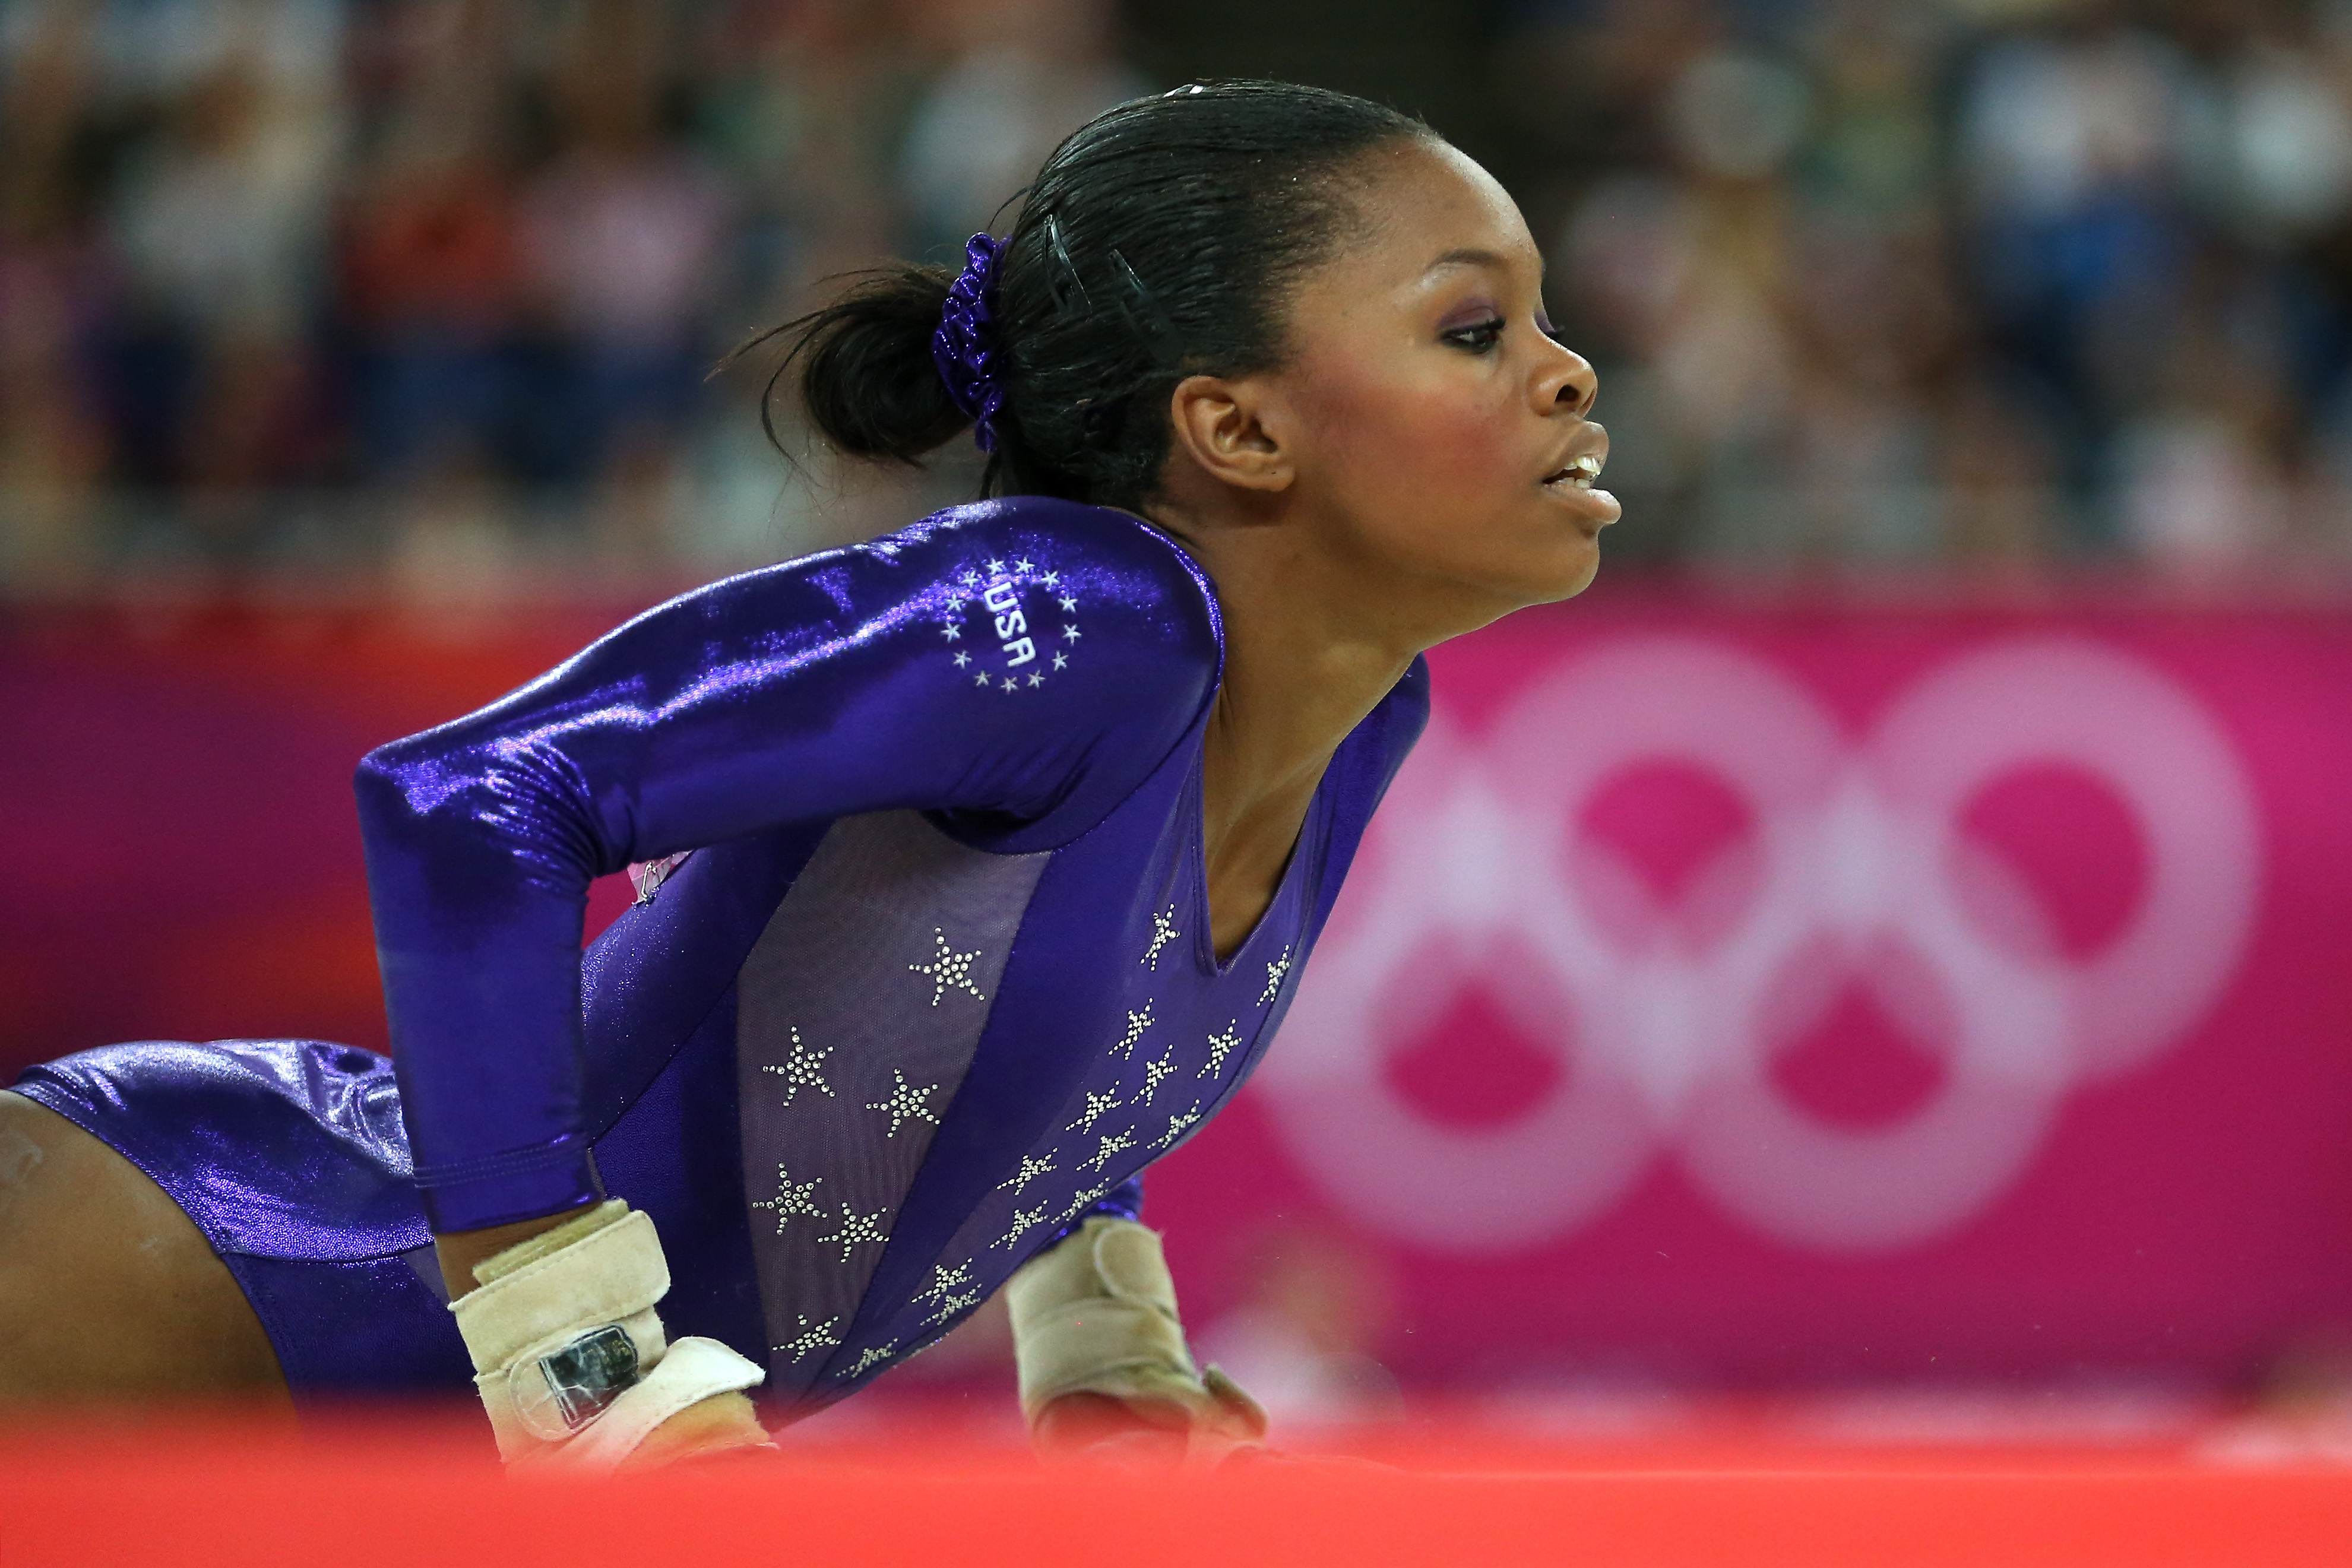 Gabrielle Douglas at North Greenwich Arena on July 29, 2012 in London, England | Source: Getty Images